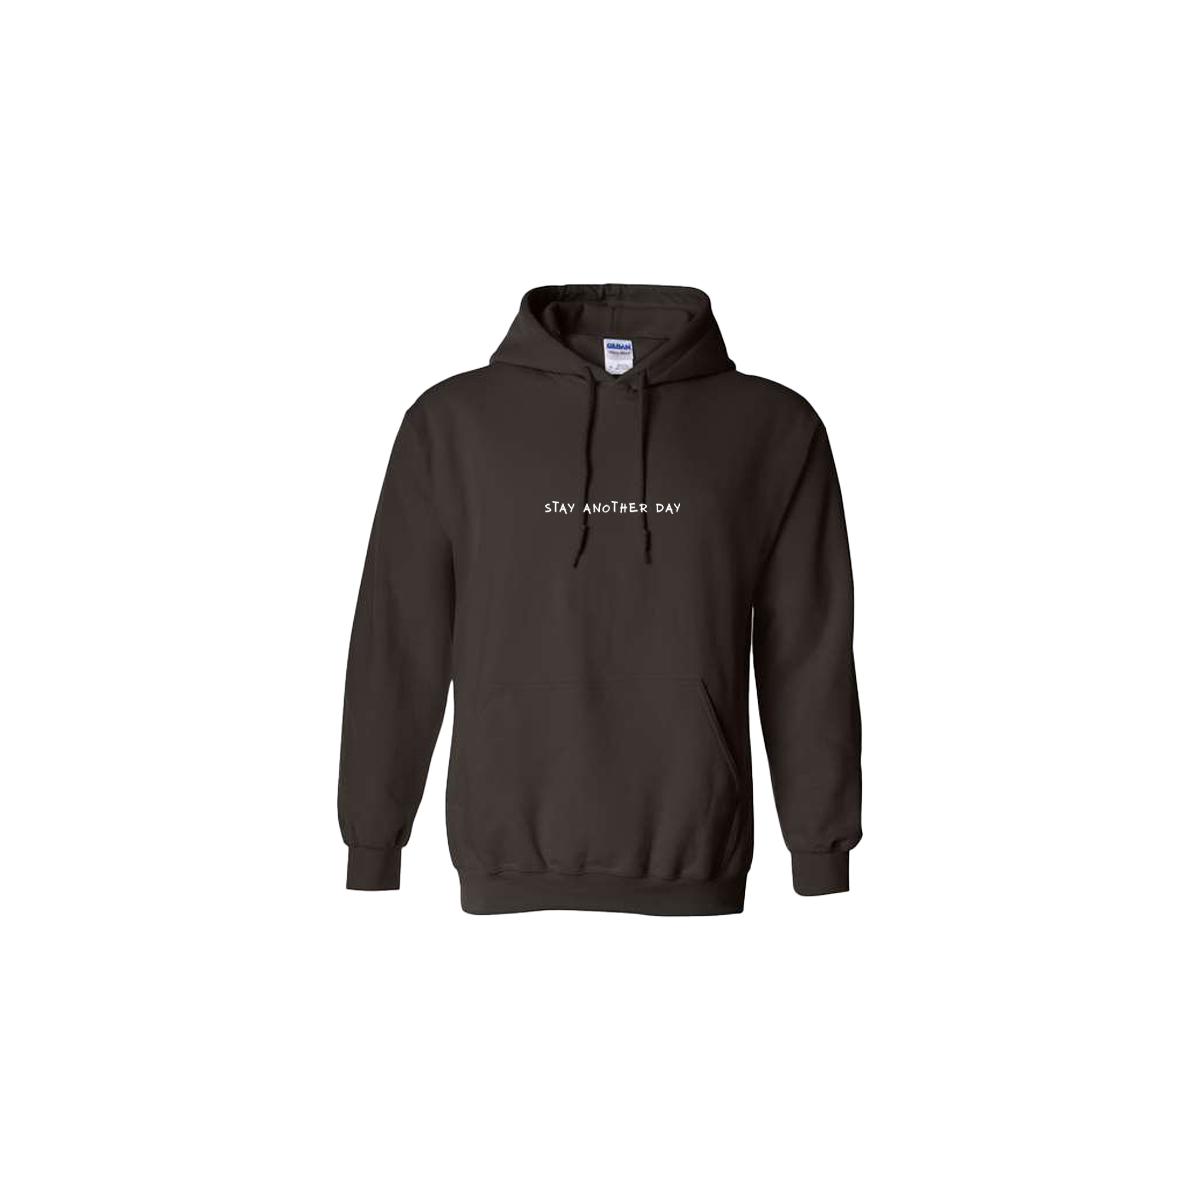 Stay Another Day Text Embroidered Brown Hoodie - Mental Health Awareness Clothing